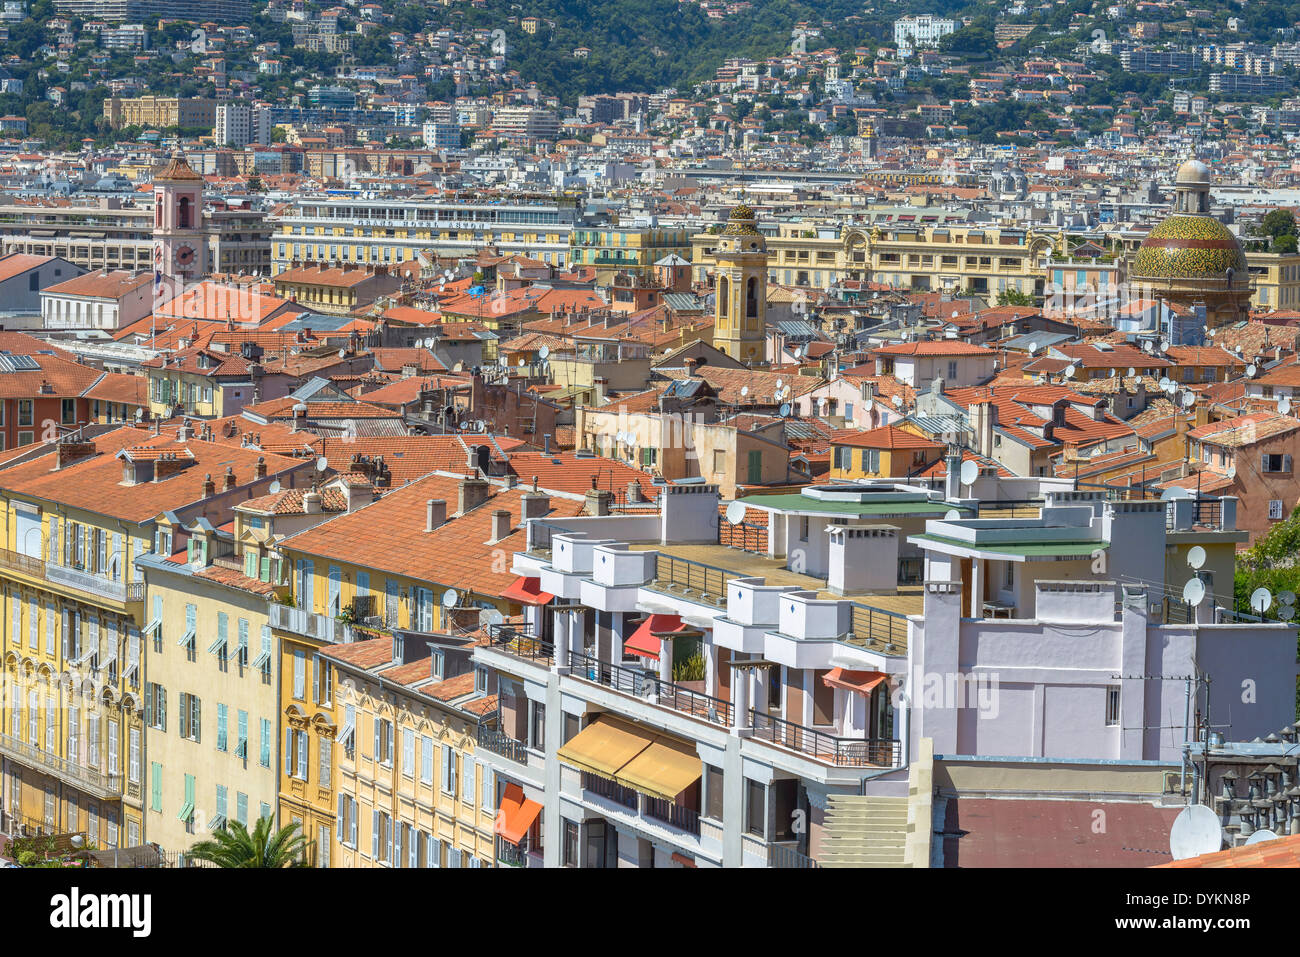 Aerial view of City of Nice, France Stock Photo